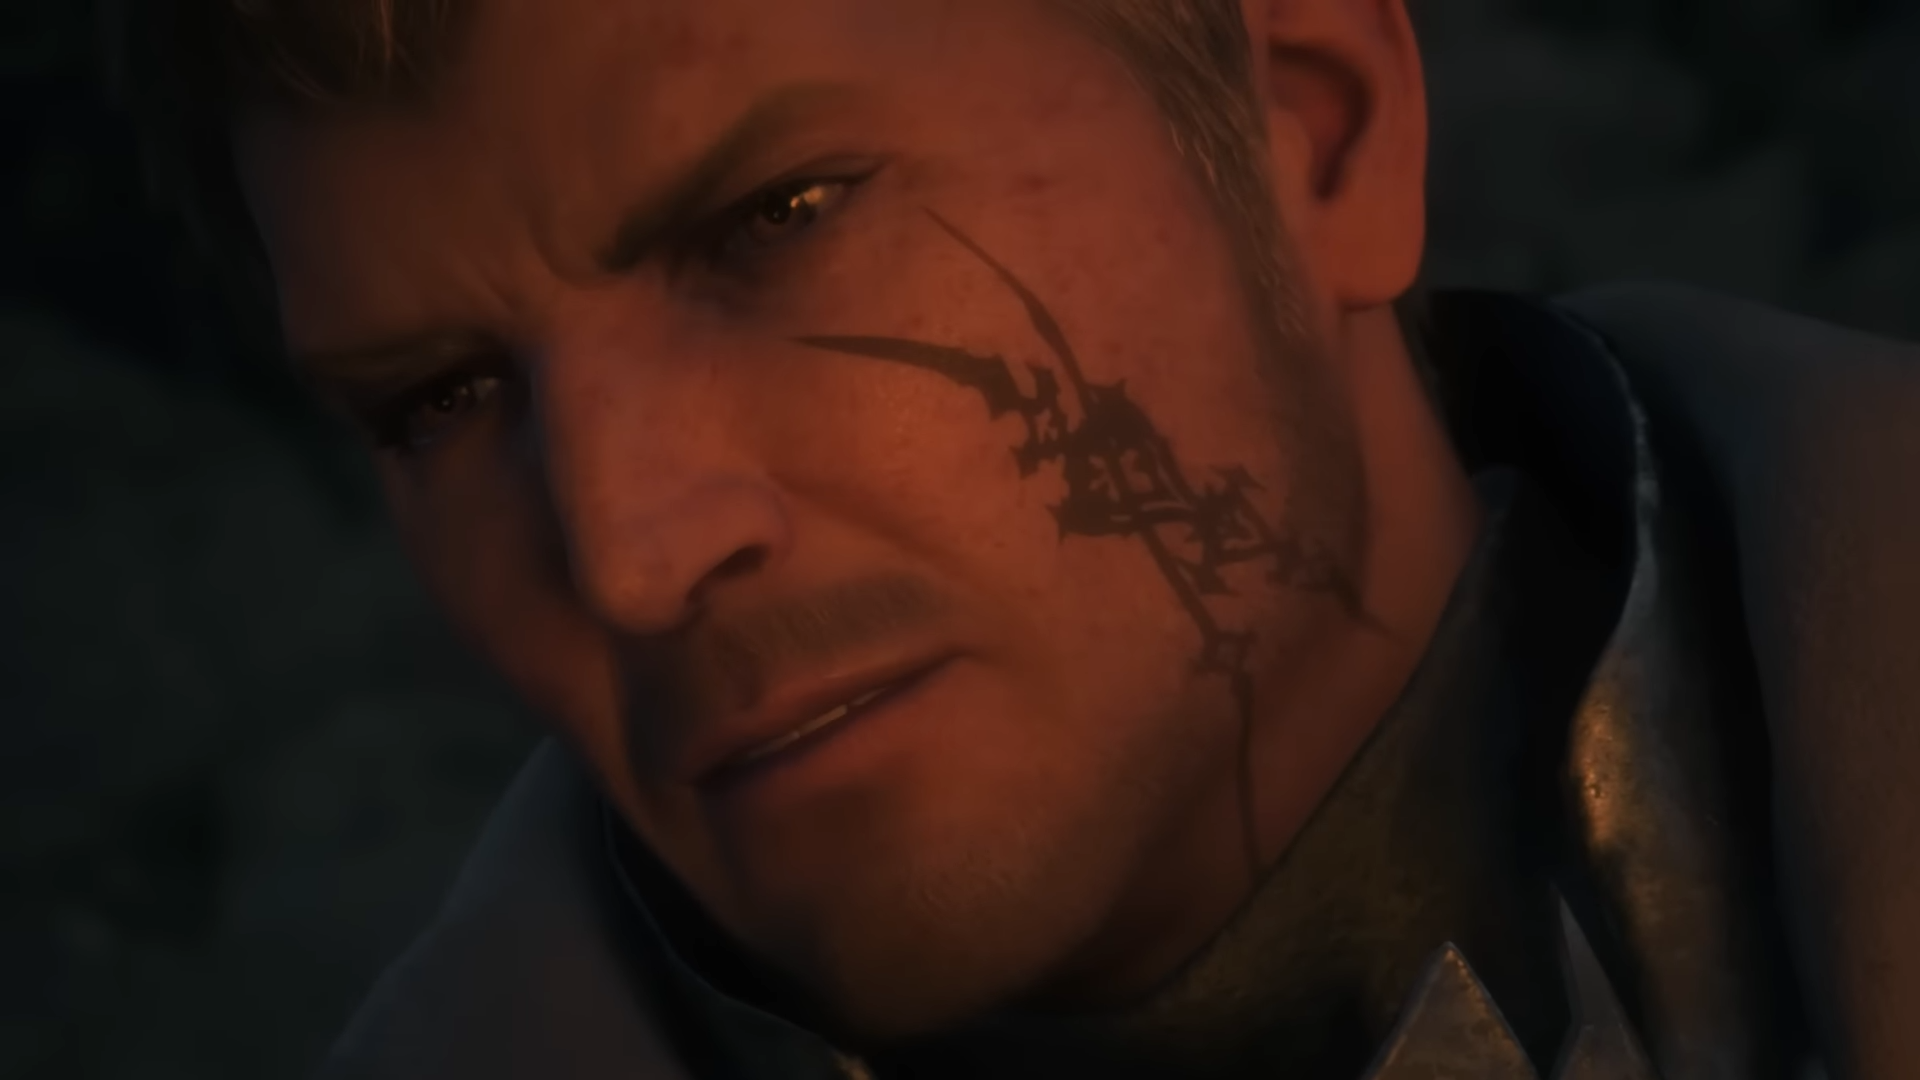 Bearer are marked with Tattoo's on their faces FF16 Bearer